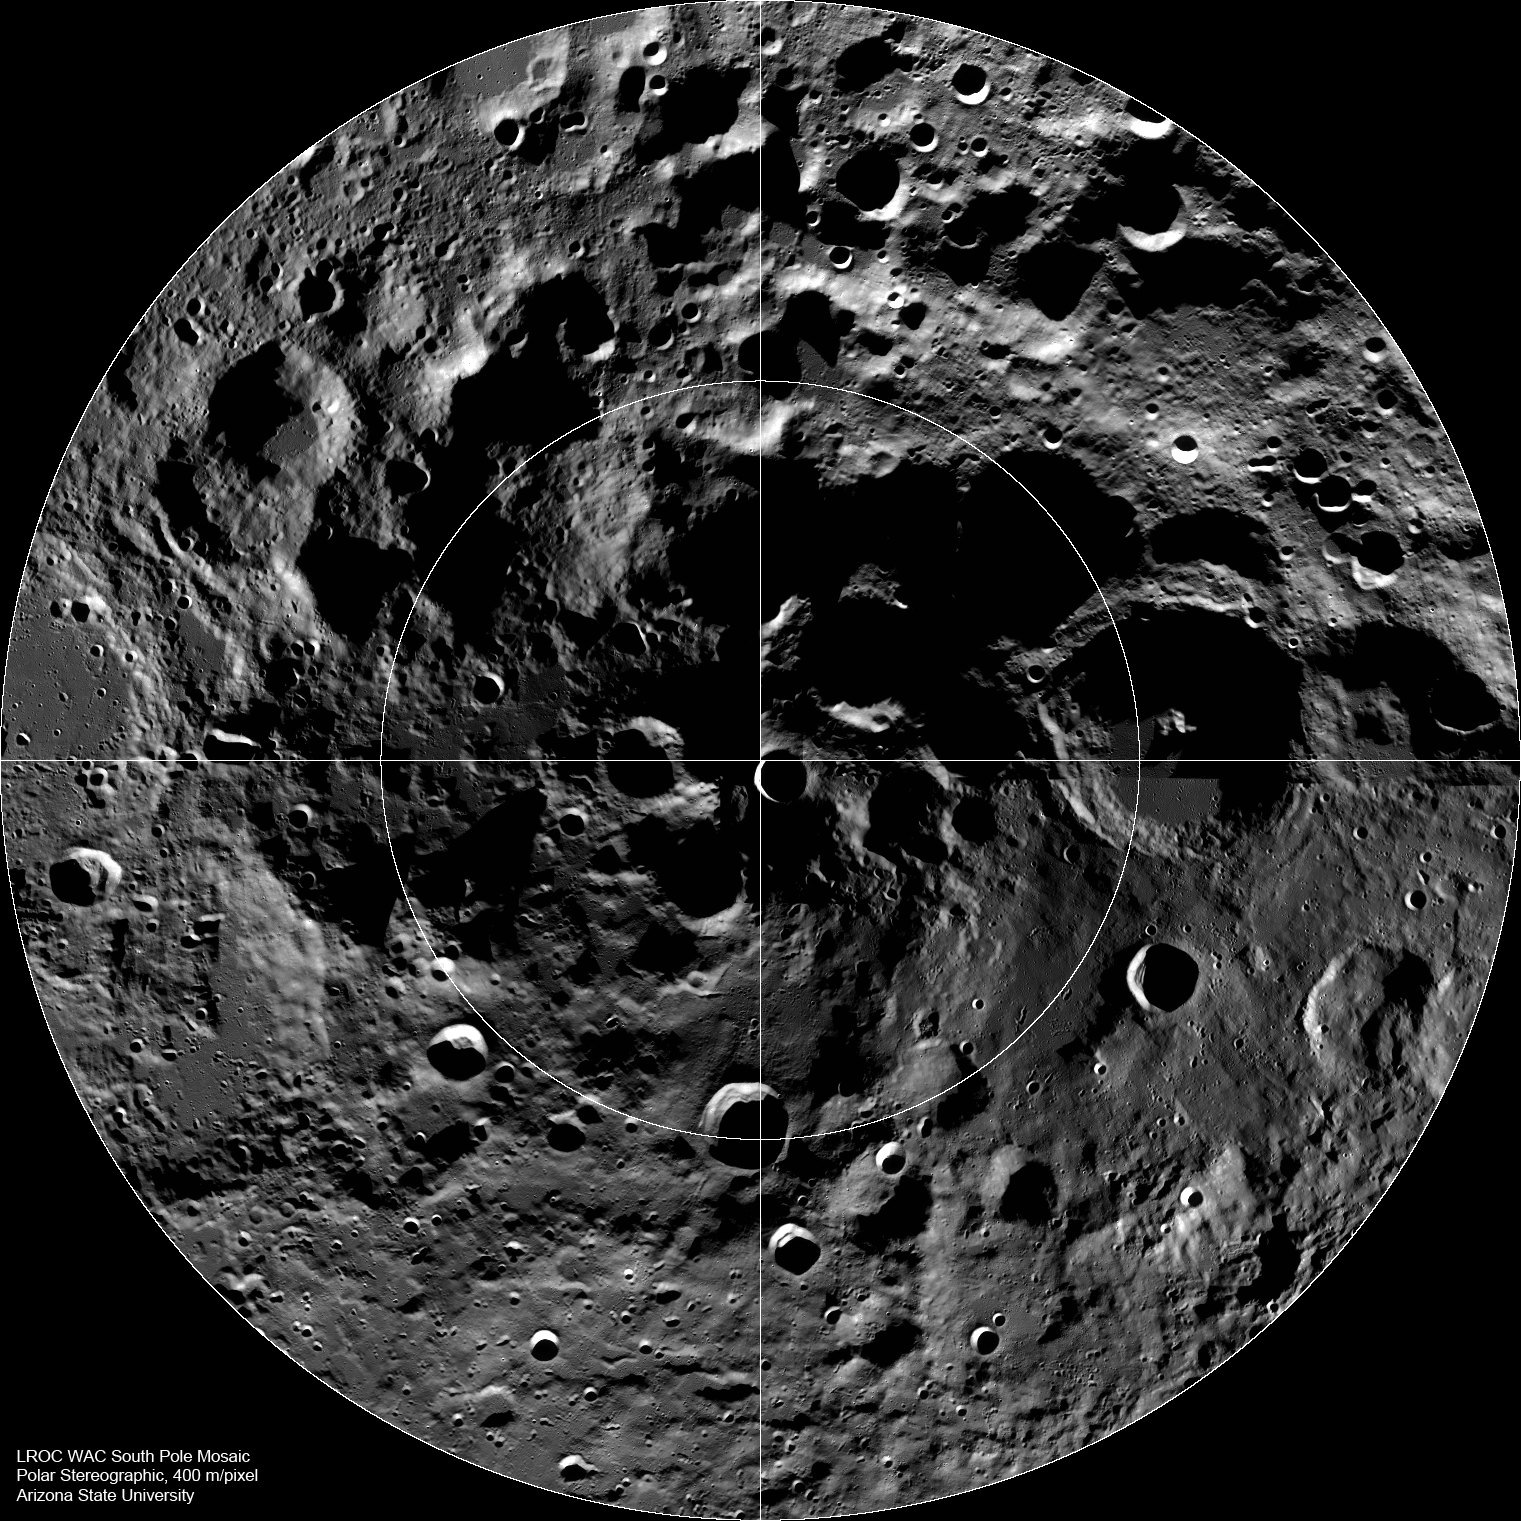 Mosaic of LRO images of the lunar south pole